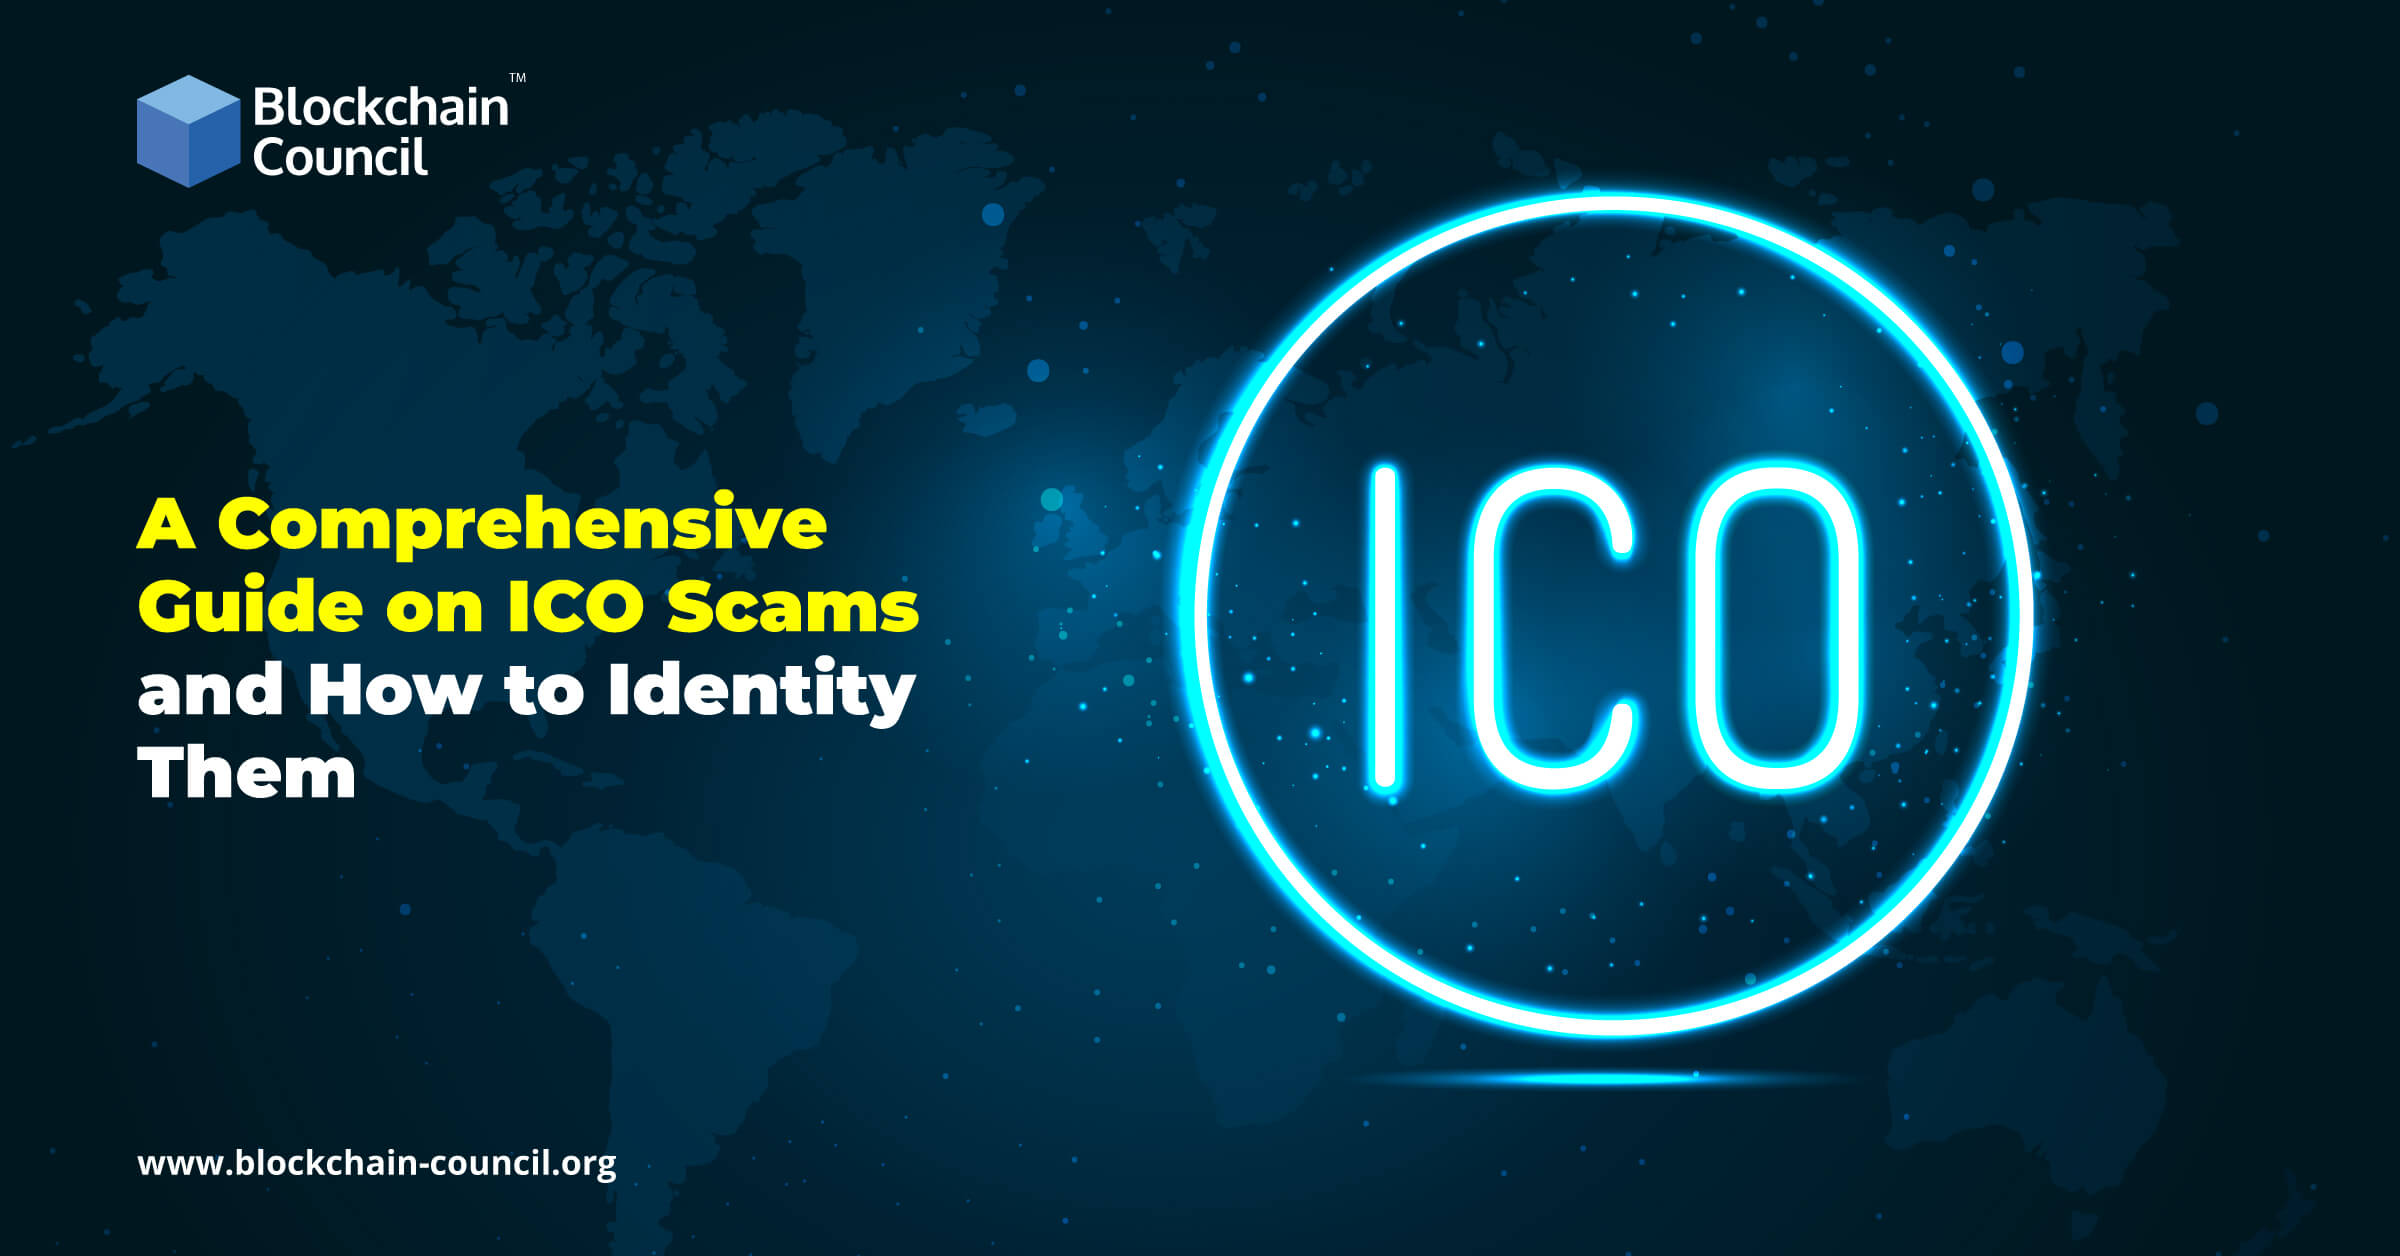 A Comprehensive Guide on ICO Scams and How to Identify Them